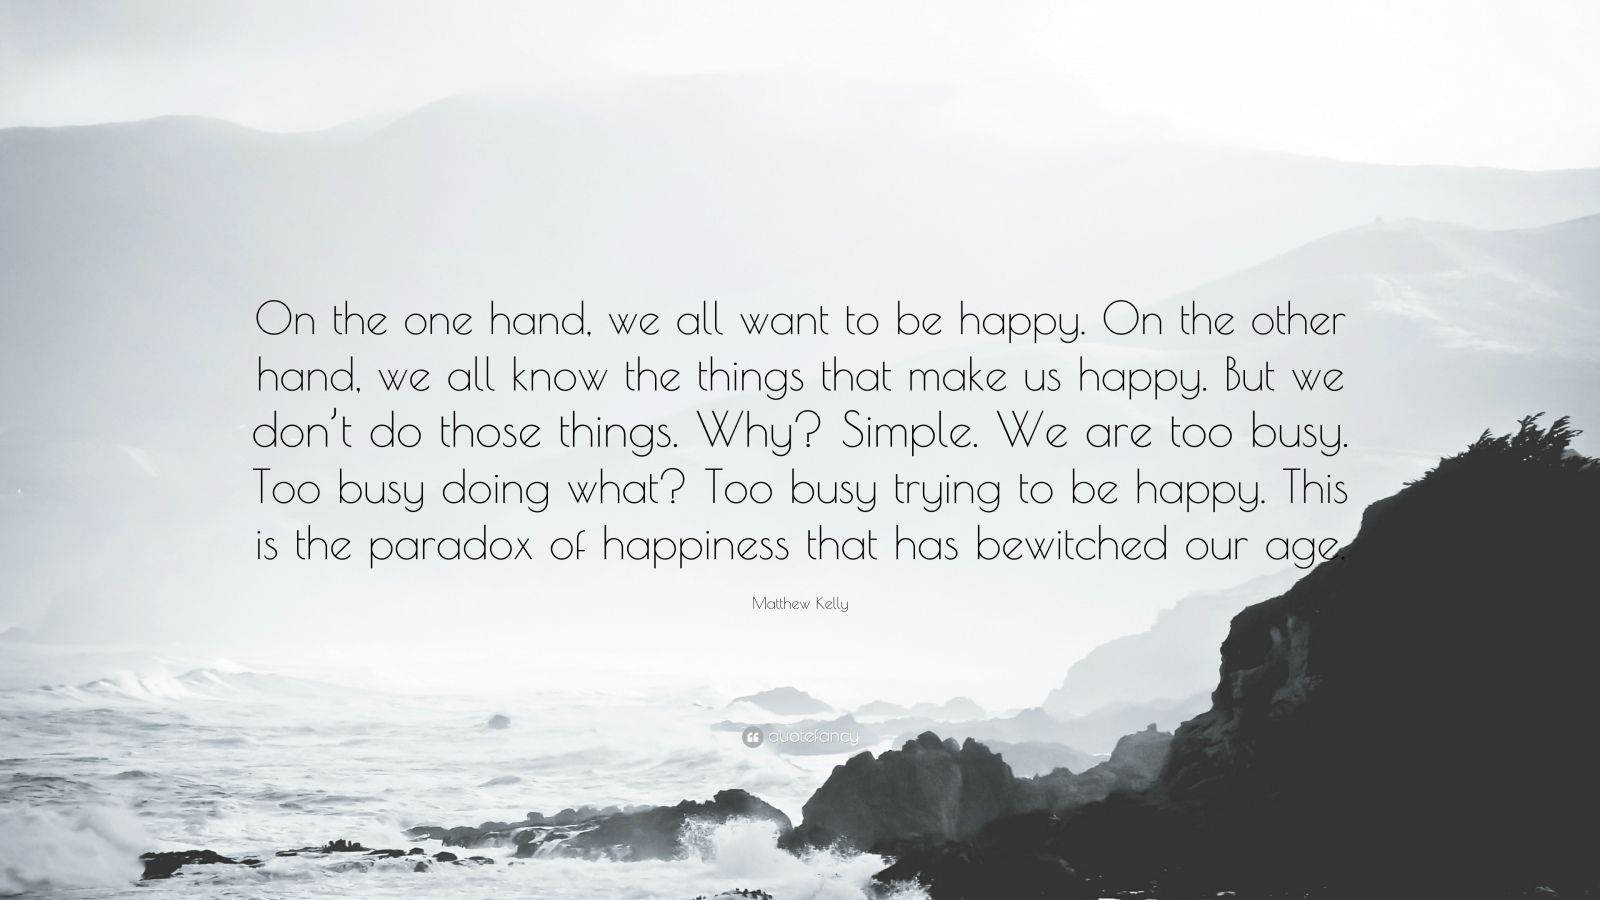 Matthew Kelly Quote: “On the one hand, we all want to be happy. On the